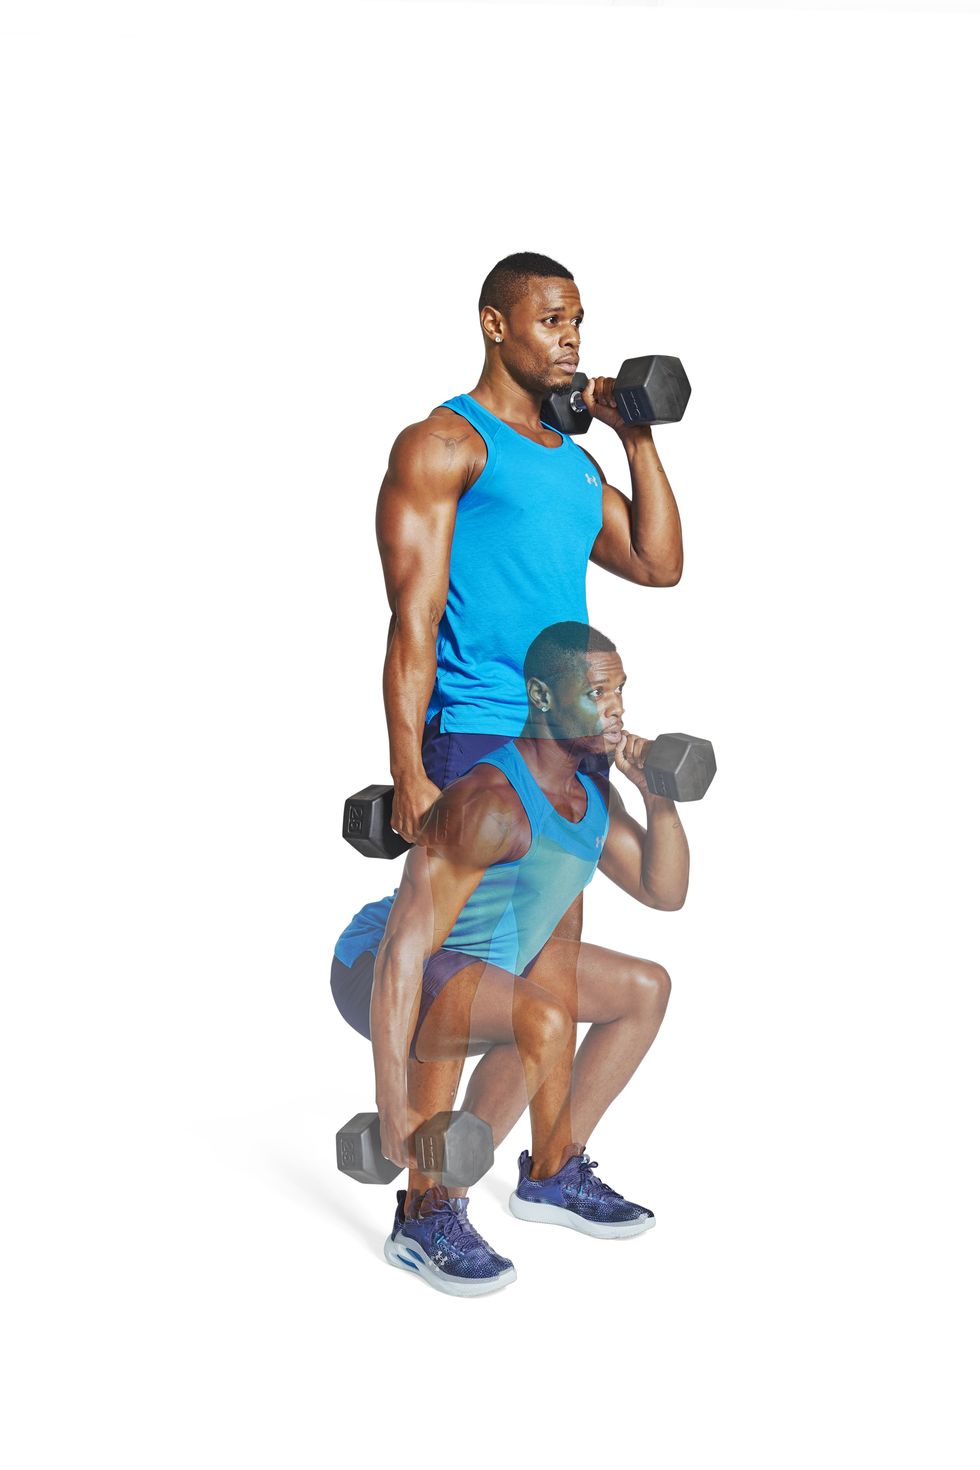 mixed rack squat muscle building, arms, strength, dumbbell exercise, workout